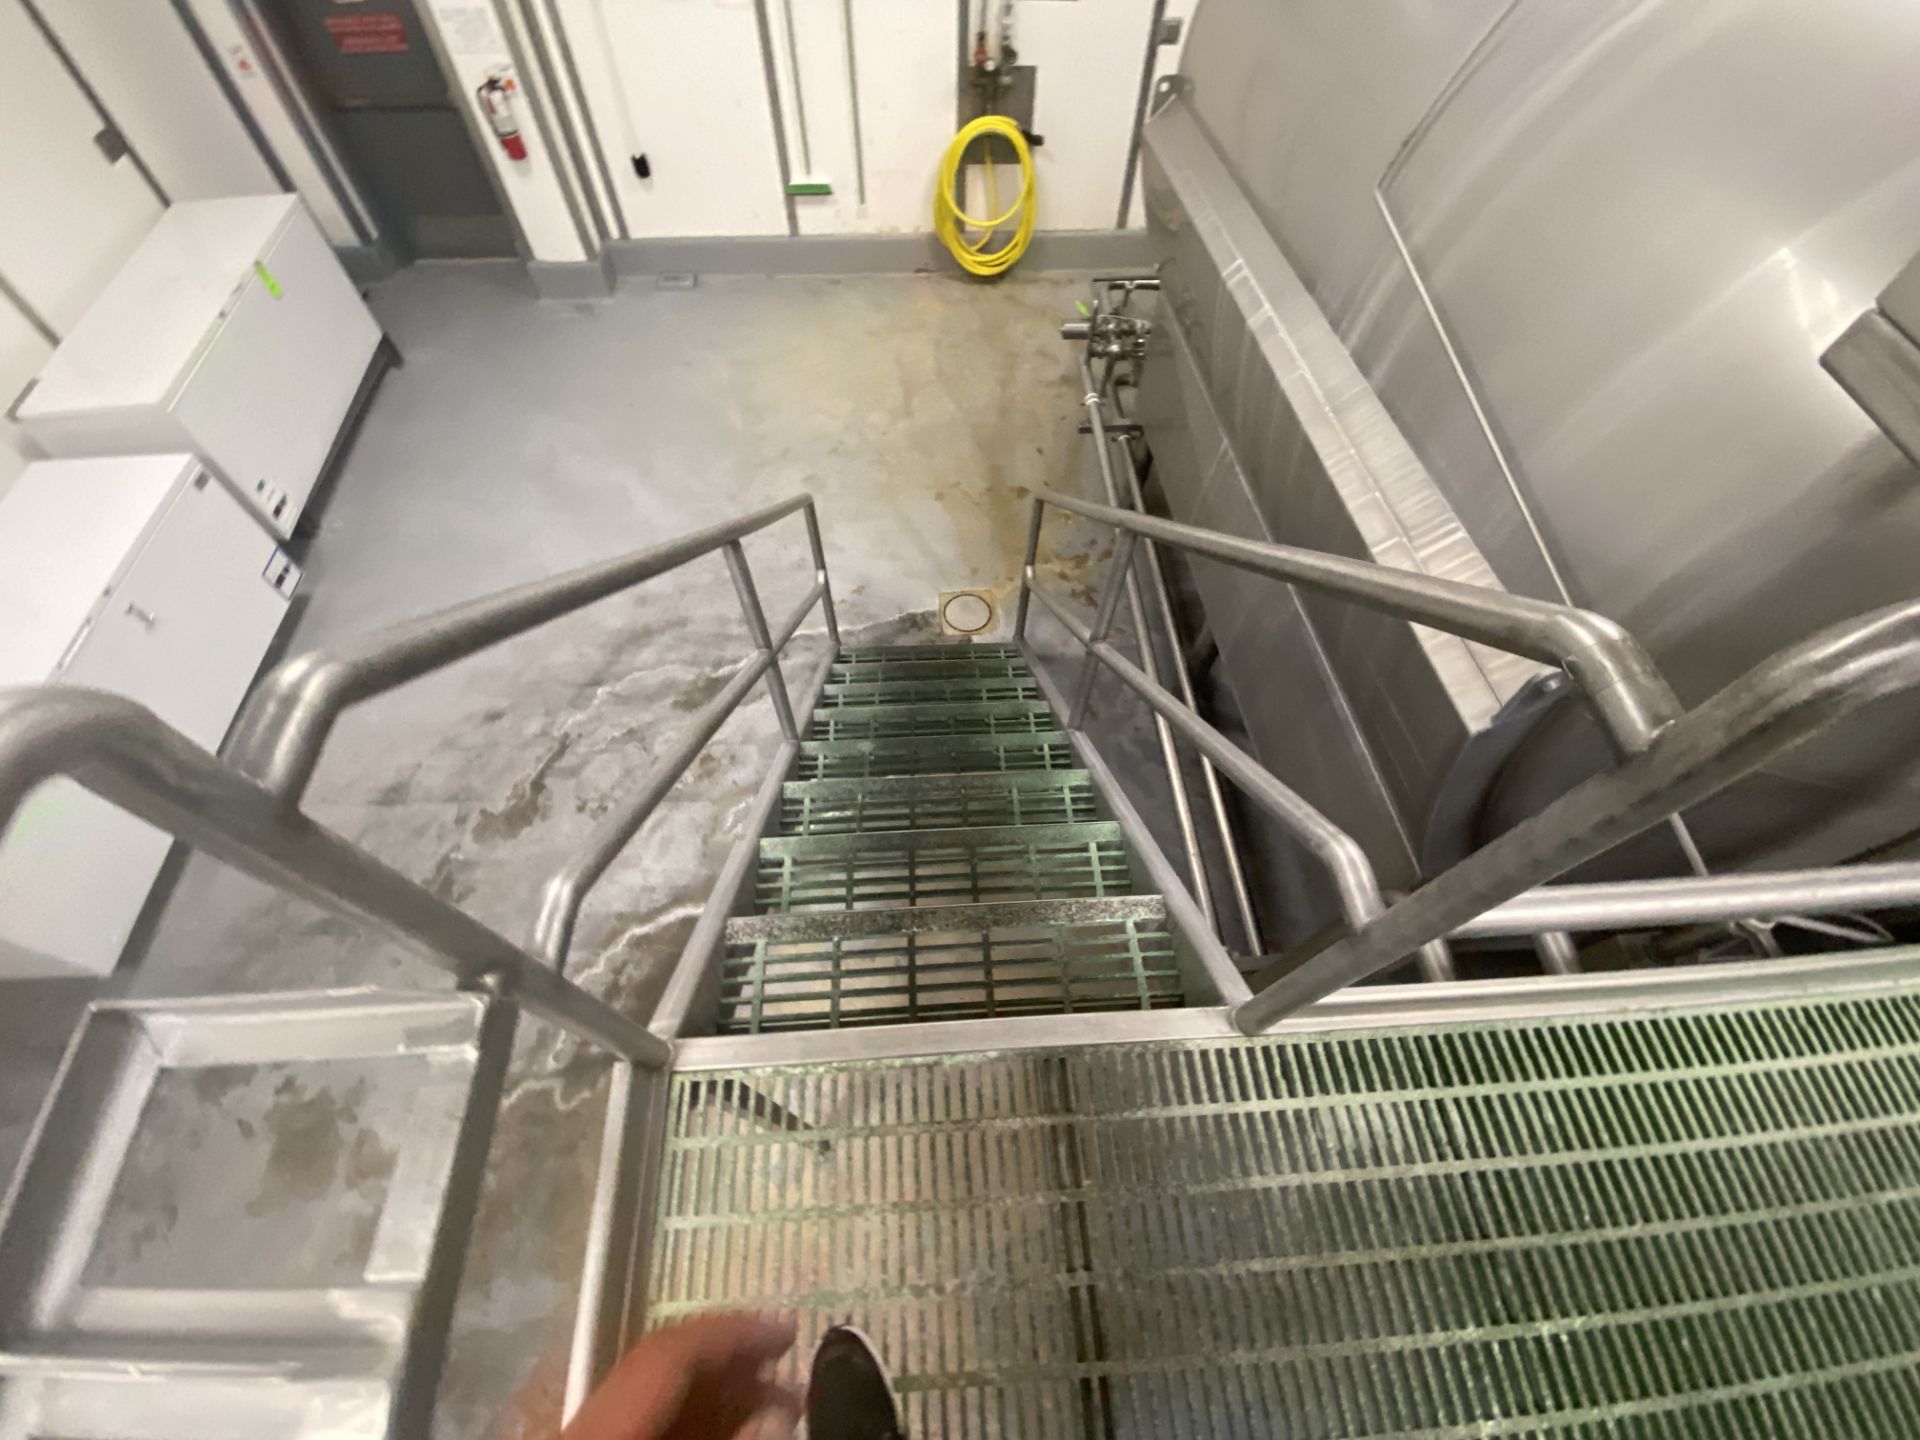 S/S Platform Servicing 4 Double O Cheese Vats, with (2) Sets of Stairs, S/S Framing & Handrails, - Image 6 of 6